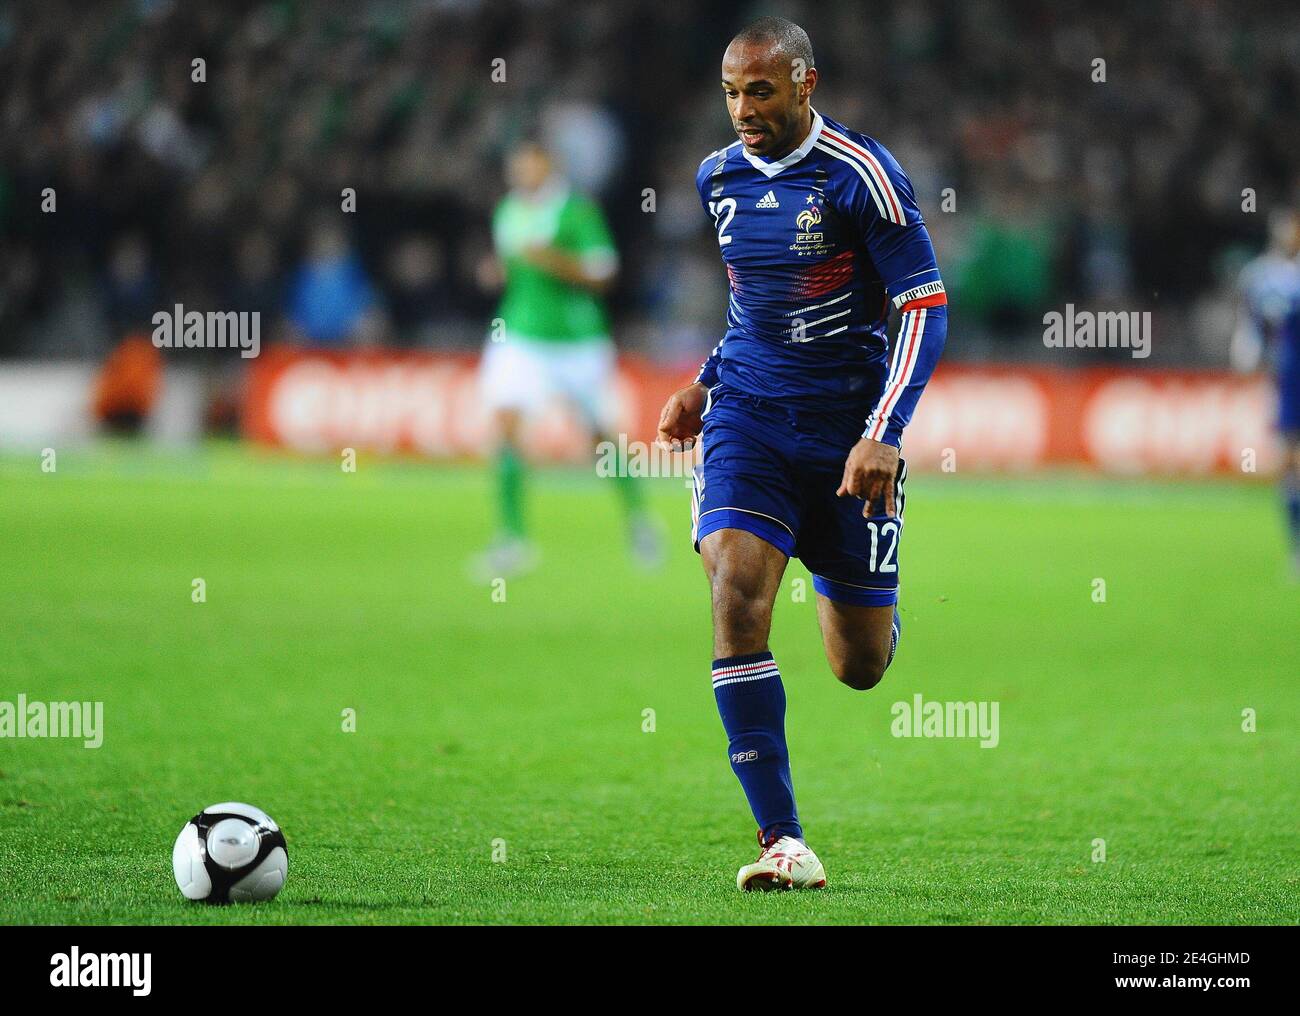 France's Thierry Henry in action during the World Cup 2010 Qualifying Play off soccer match, Ireland vs France at Croke Park stadium in Dublin, Ireland on November 14, 2009. France won 1-0. Photo by Steeve McMay/ABACAPRESS.COM Stock Photo